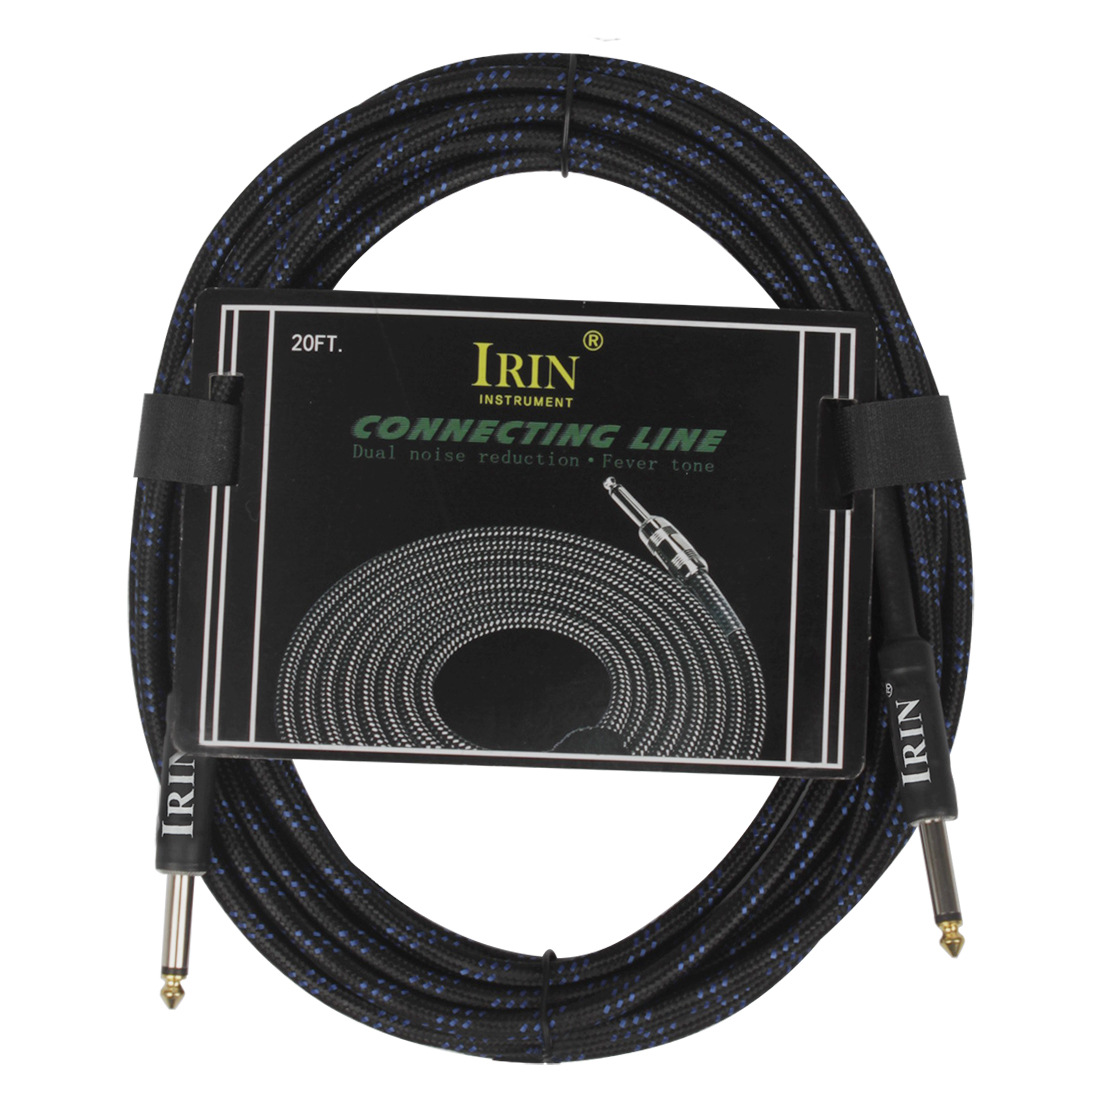 6M Cable Guitar Connecting Line Musical Instrument Accessories Blue 6 meters